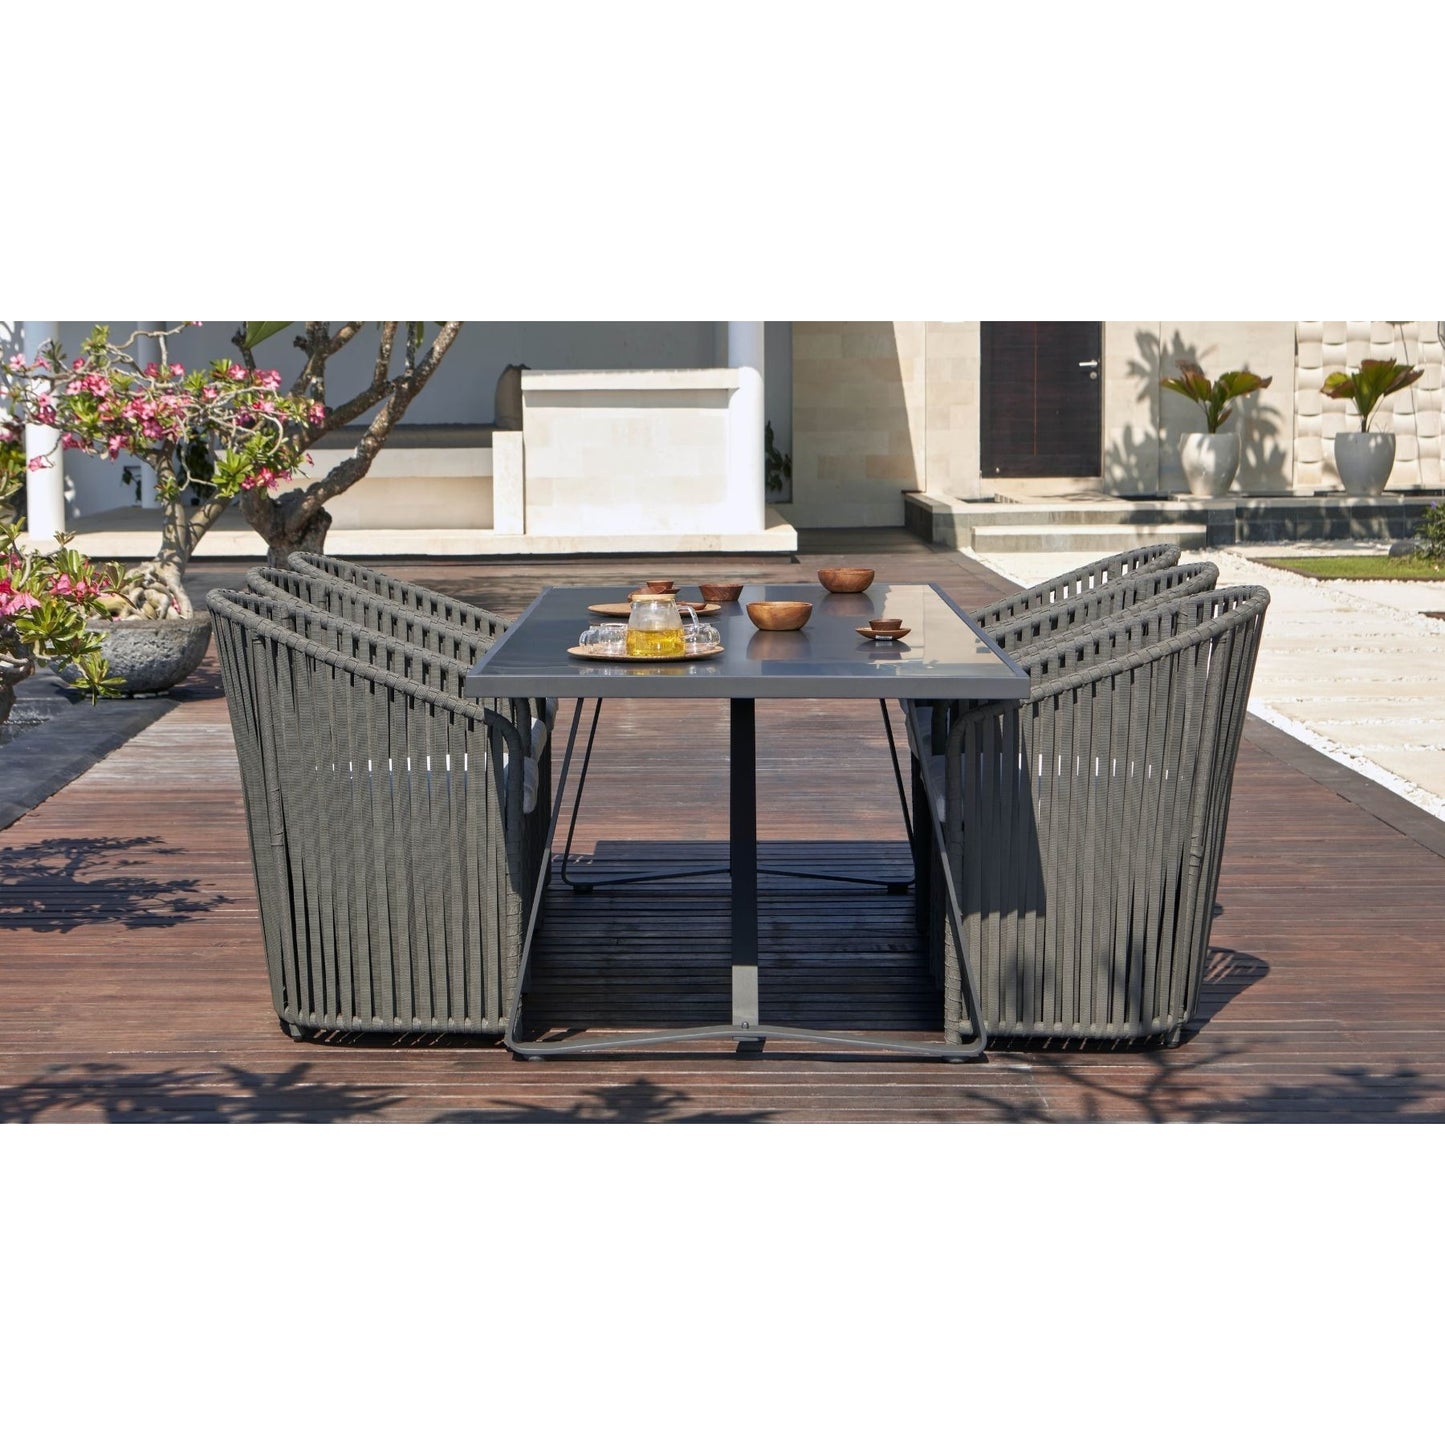 Horizon Rectangle Table (6 Seater or 8 Seater) - PadioLiving - Horizon Rectangle Table (6 Seater or 8 Seater) - Outdoor Dining Table - PadioLiving